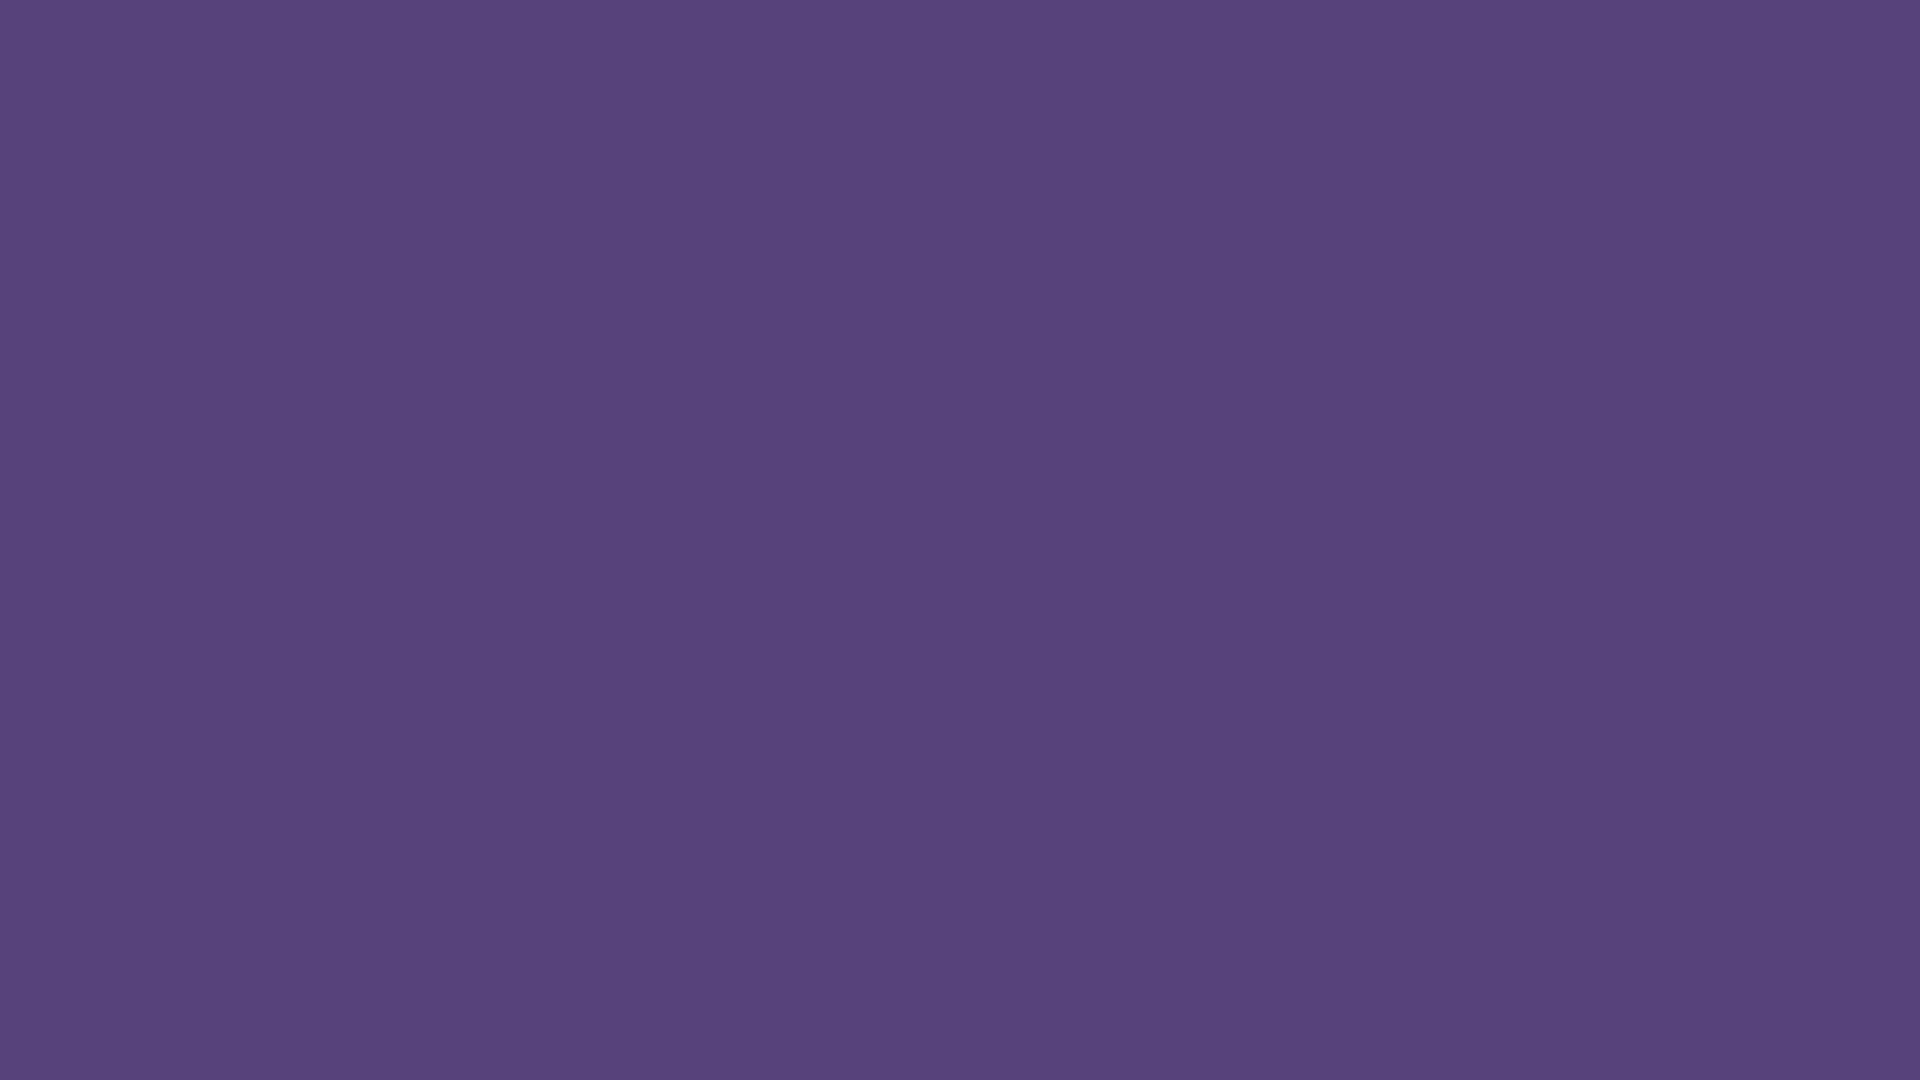 1920x1080 Cyber Grape Solid Color Background